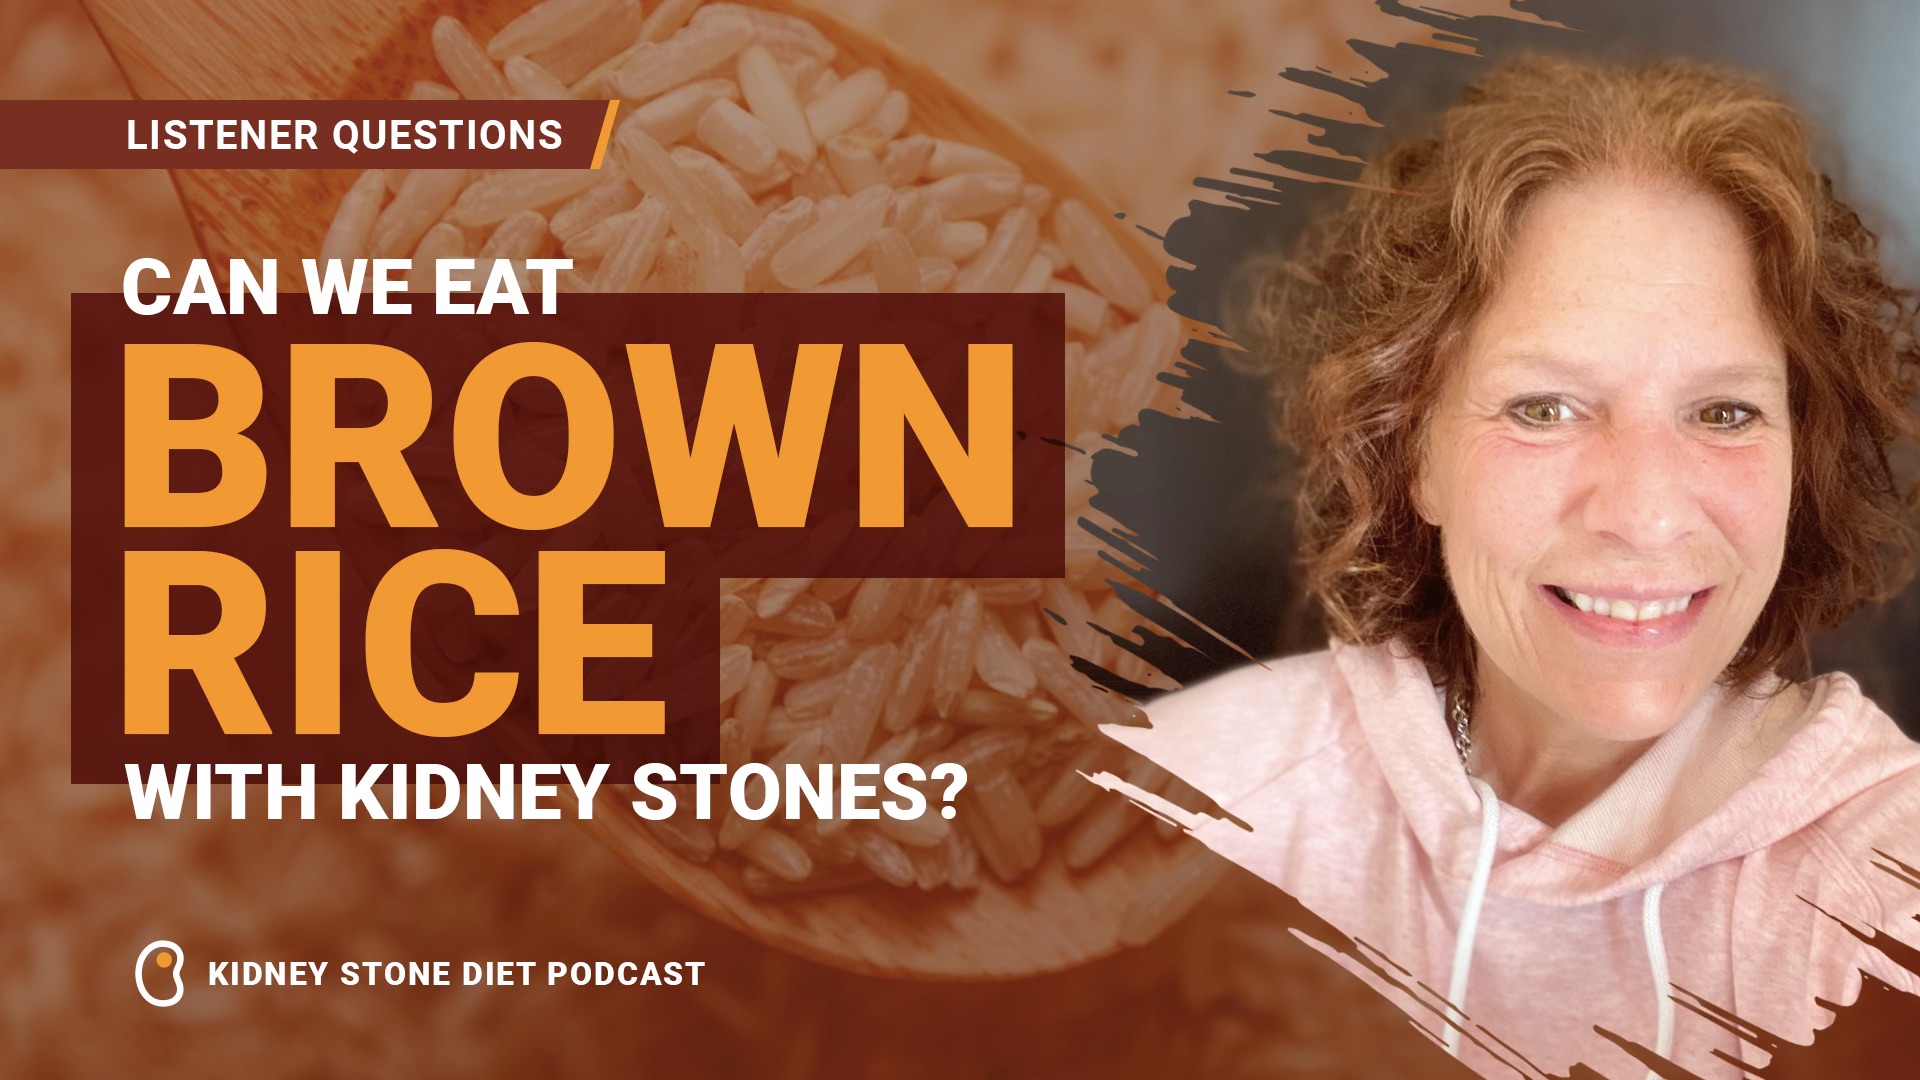 Can we eat brown rice with kidney stones?